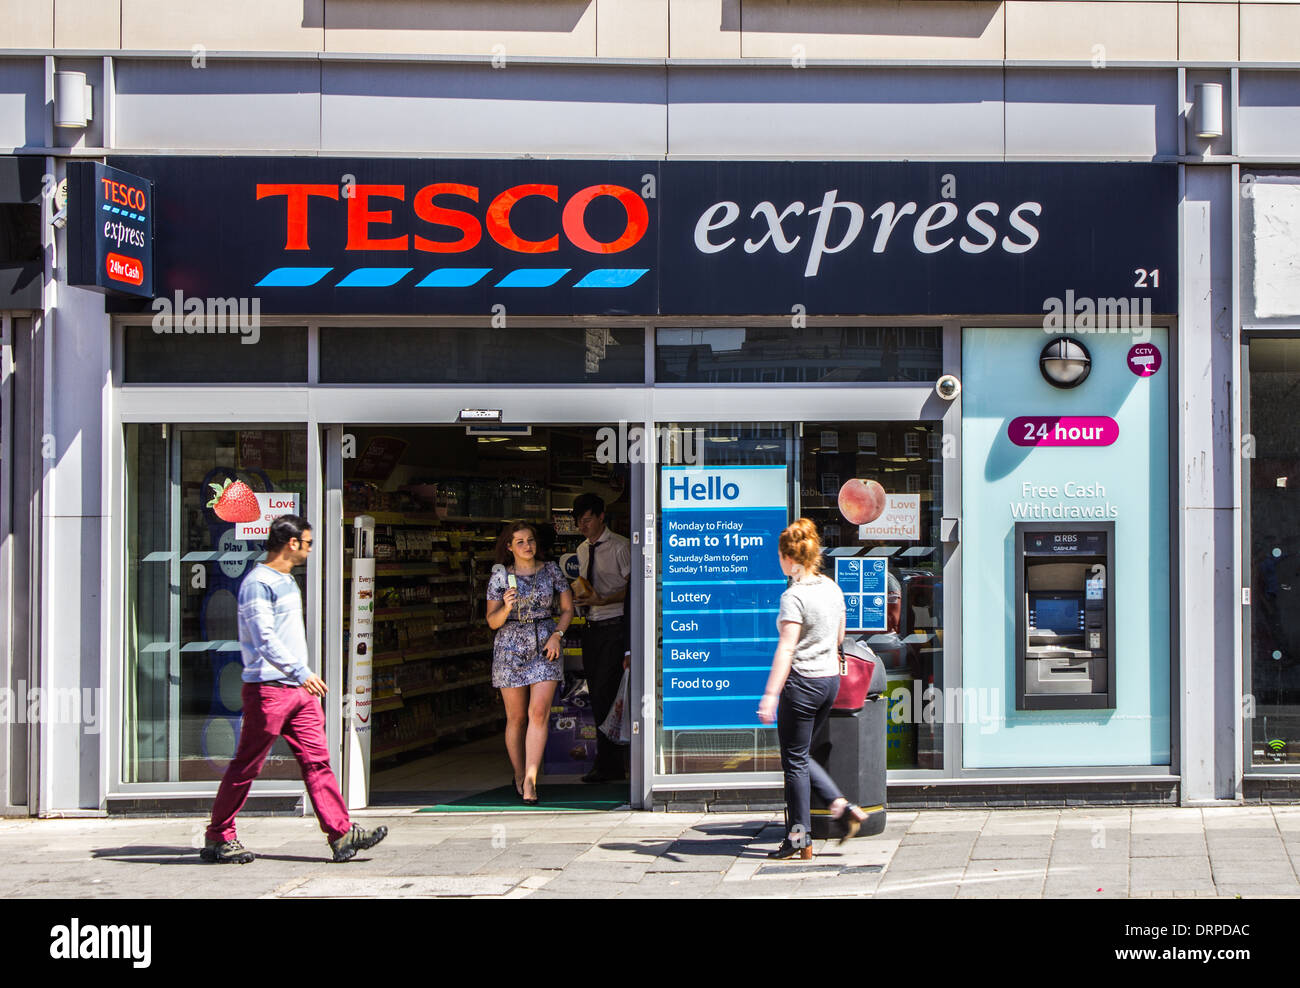 London, UK - 1st August 2013: The outside of a Tesco Express Store with people going past and in the shop Stock Photo